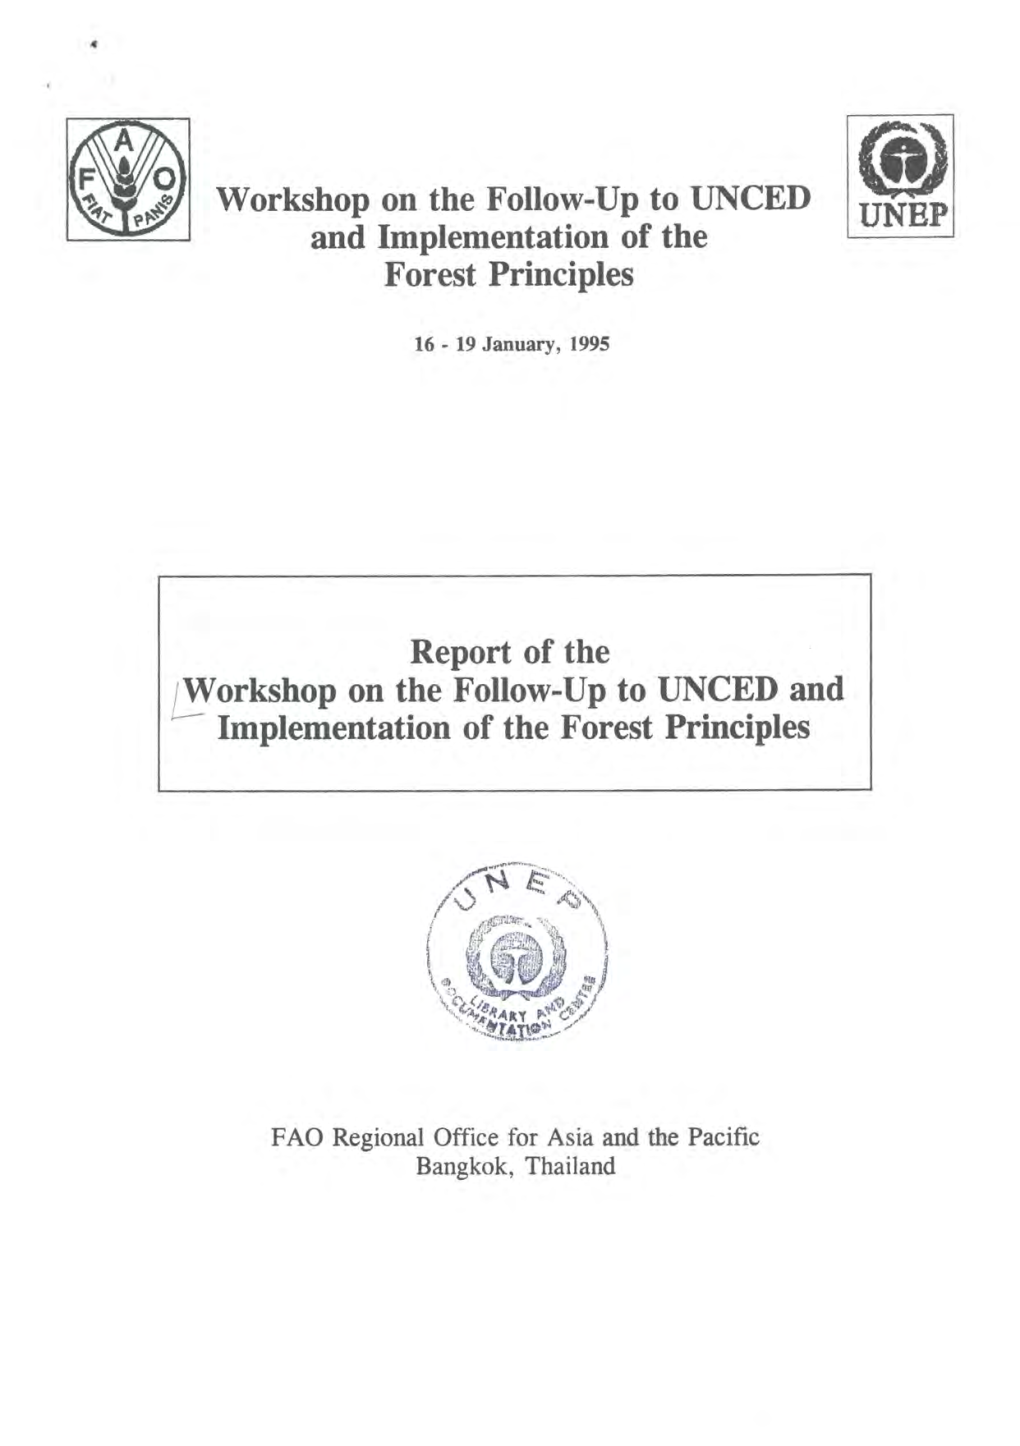 Workshop on the Follow-Up to UNCED and Implementation of the Forest Principles Report of the Workshop on the Follow-Up to UNCED